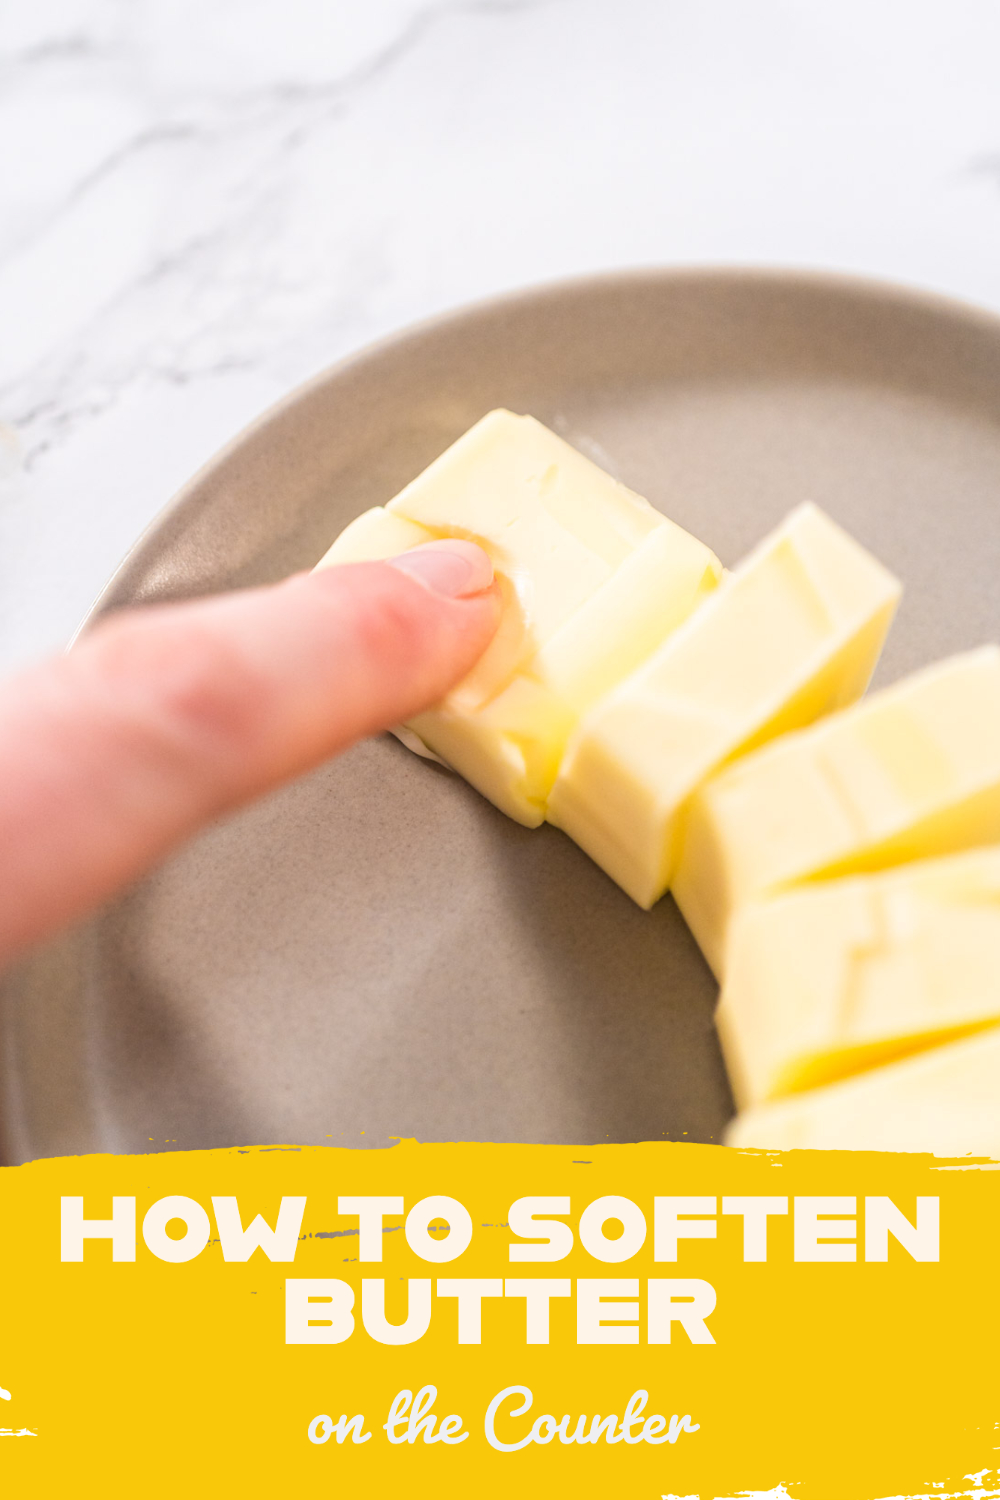 How to Soften Butter on the Counter